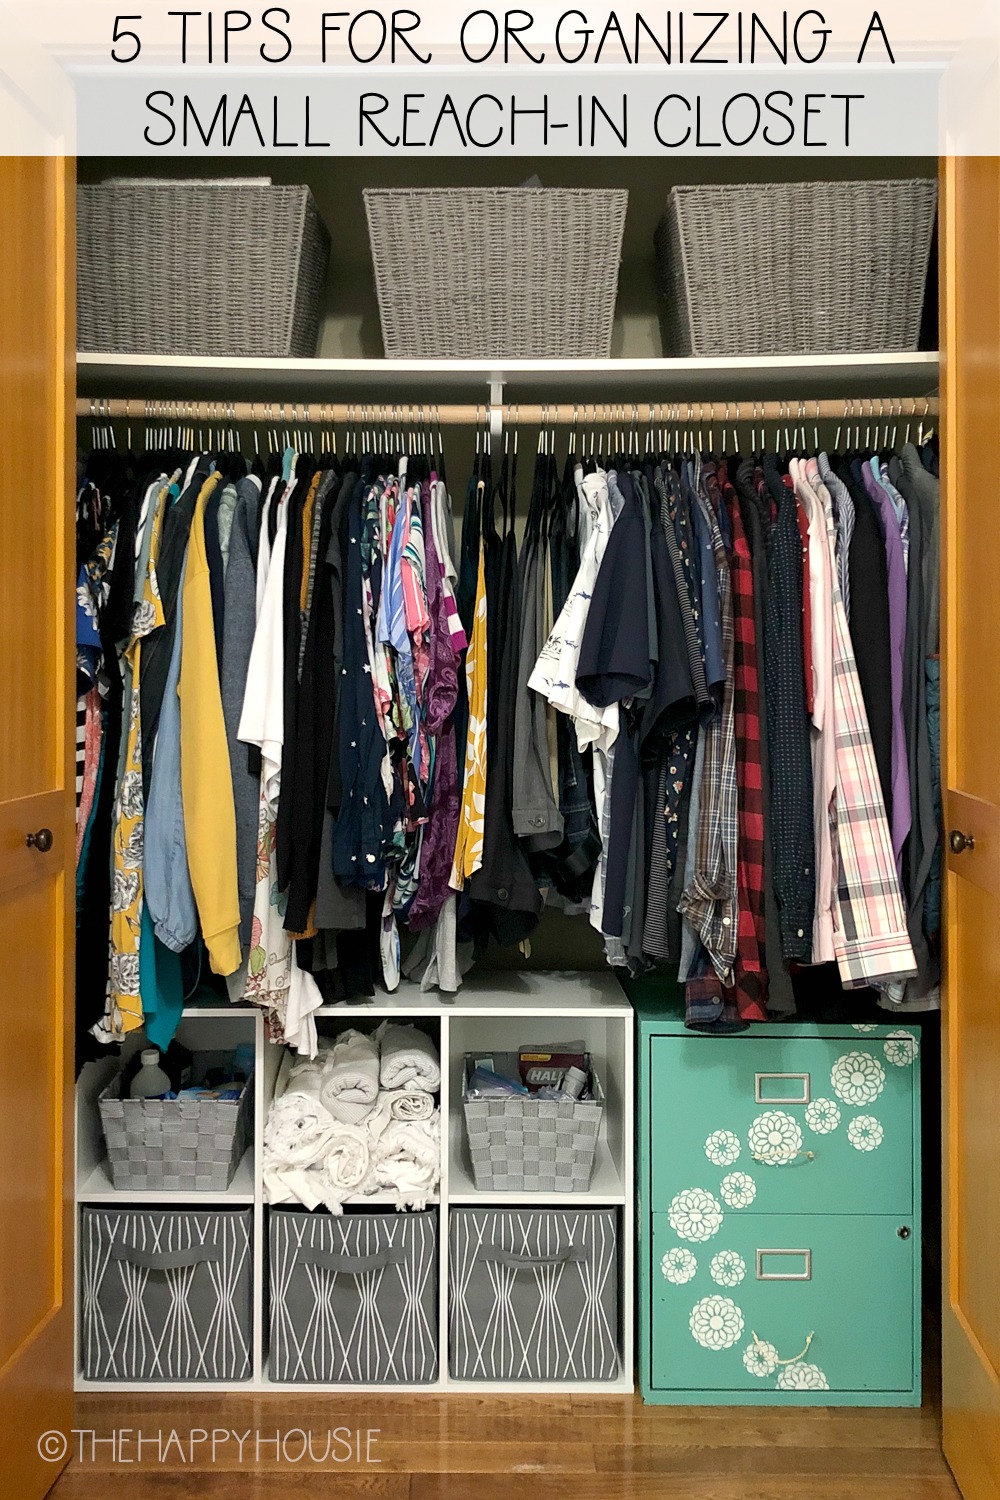 https://www.thehappyhousie.com/wp-content/uploads/2020/08/5-tips-for-organizing-a-small-reach-in-closet-.jpg